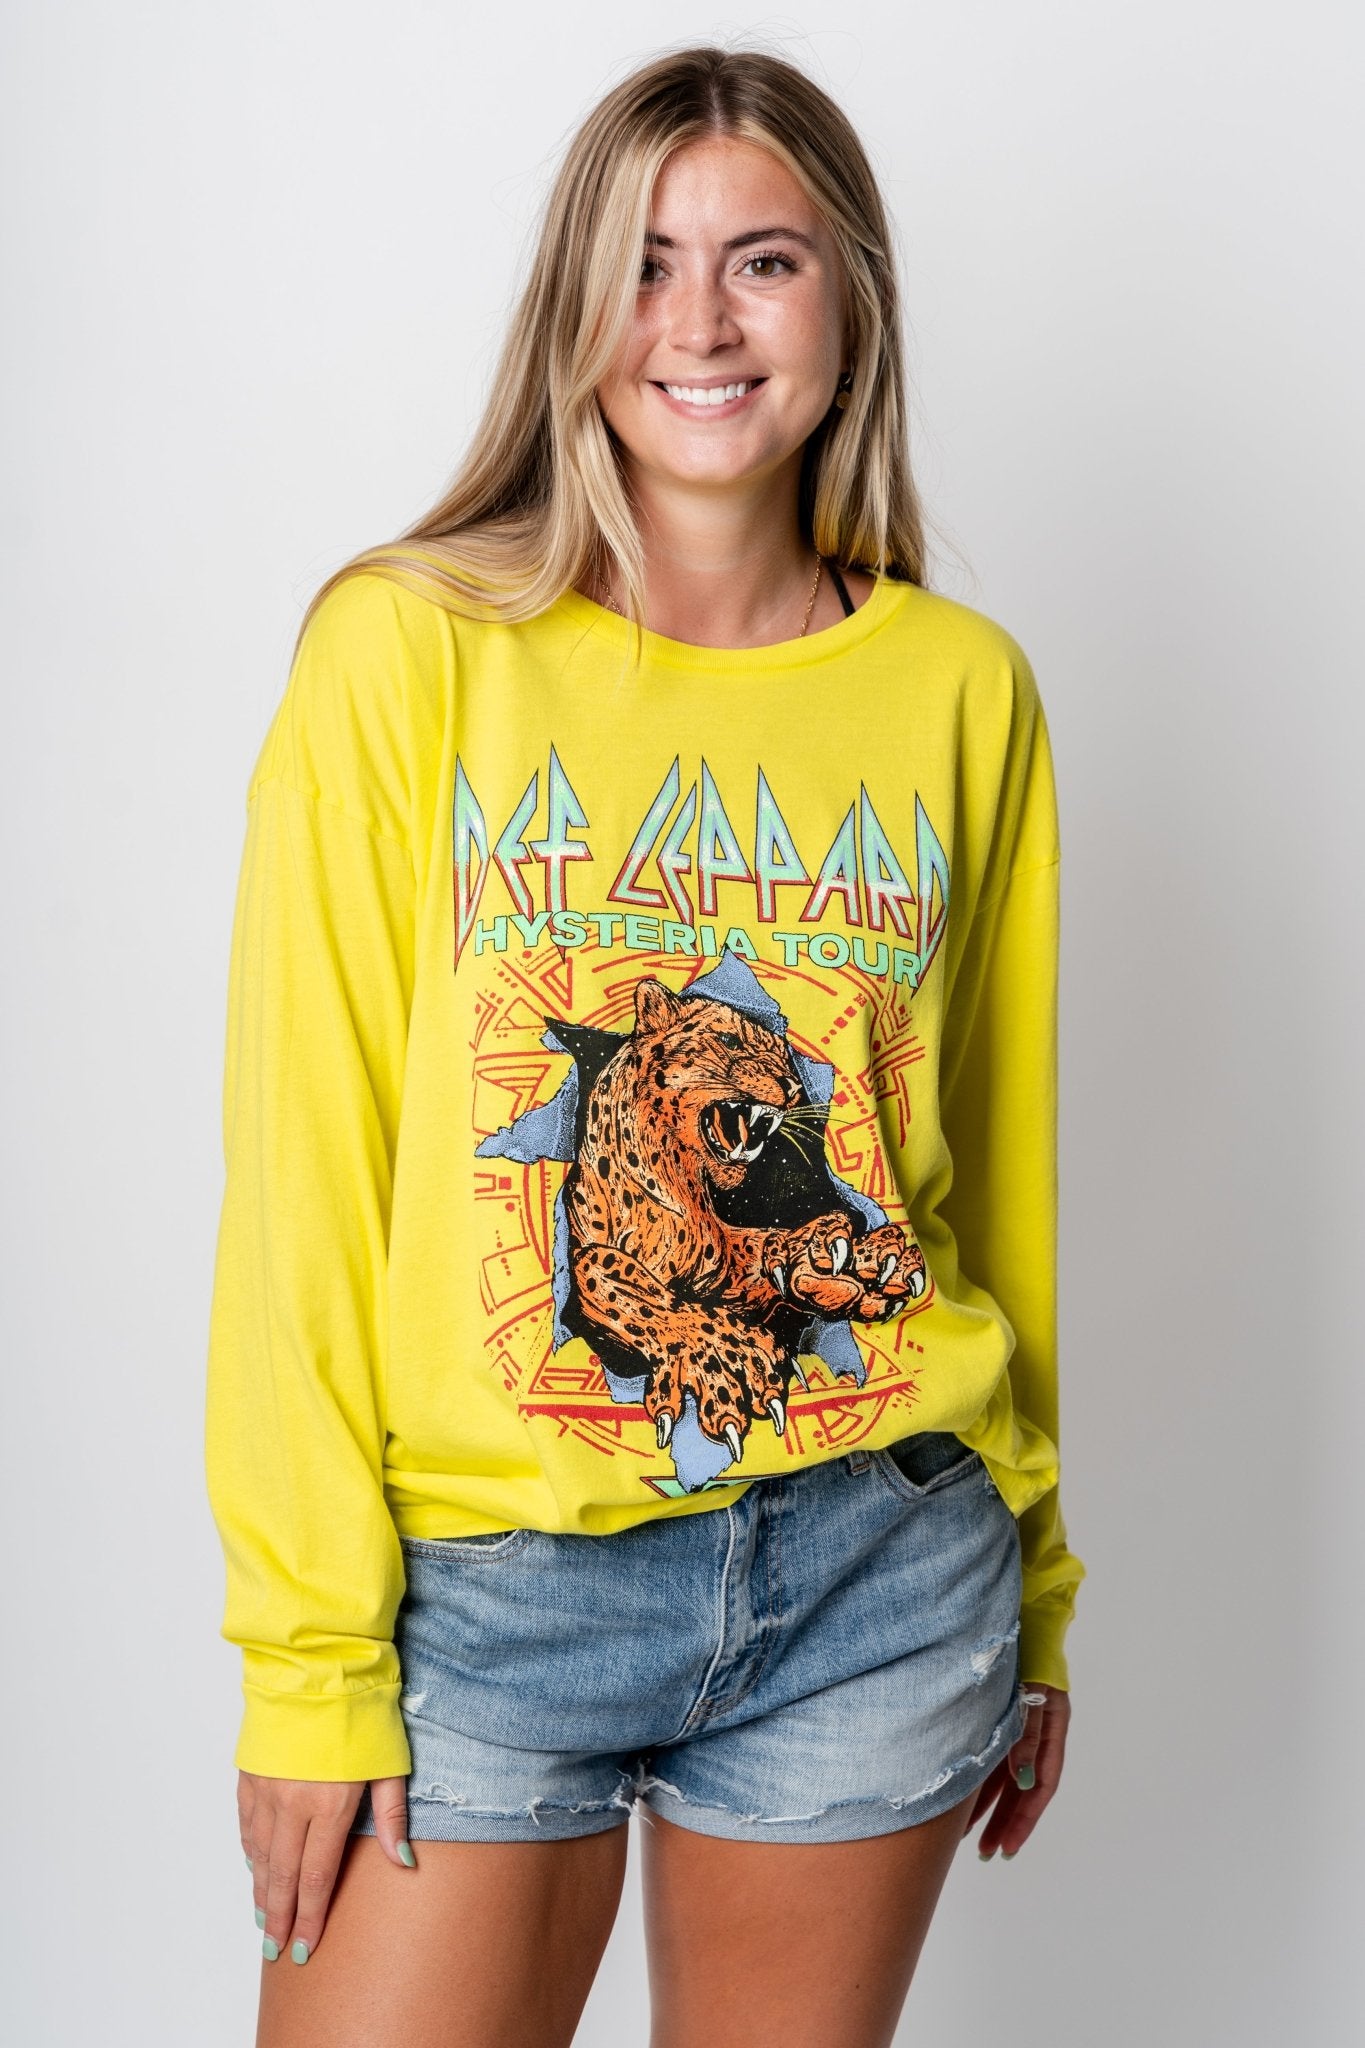 DayDreamer Def Leppard hysteria tour long sleeve tee lemon tonic - Stylish Band T-Shirts and Sweatshirts at Lush Fashion Lounge Boutique in Oklahoma City